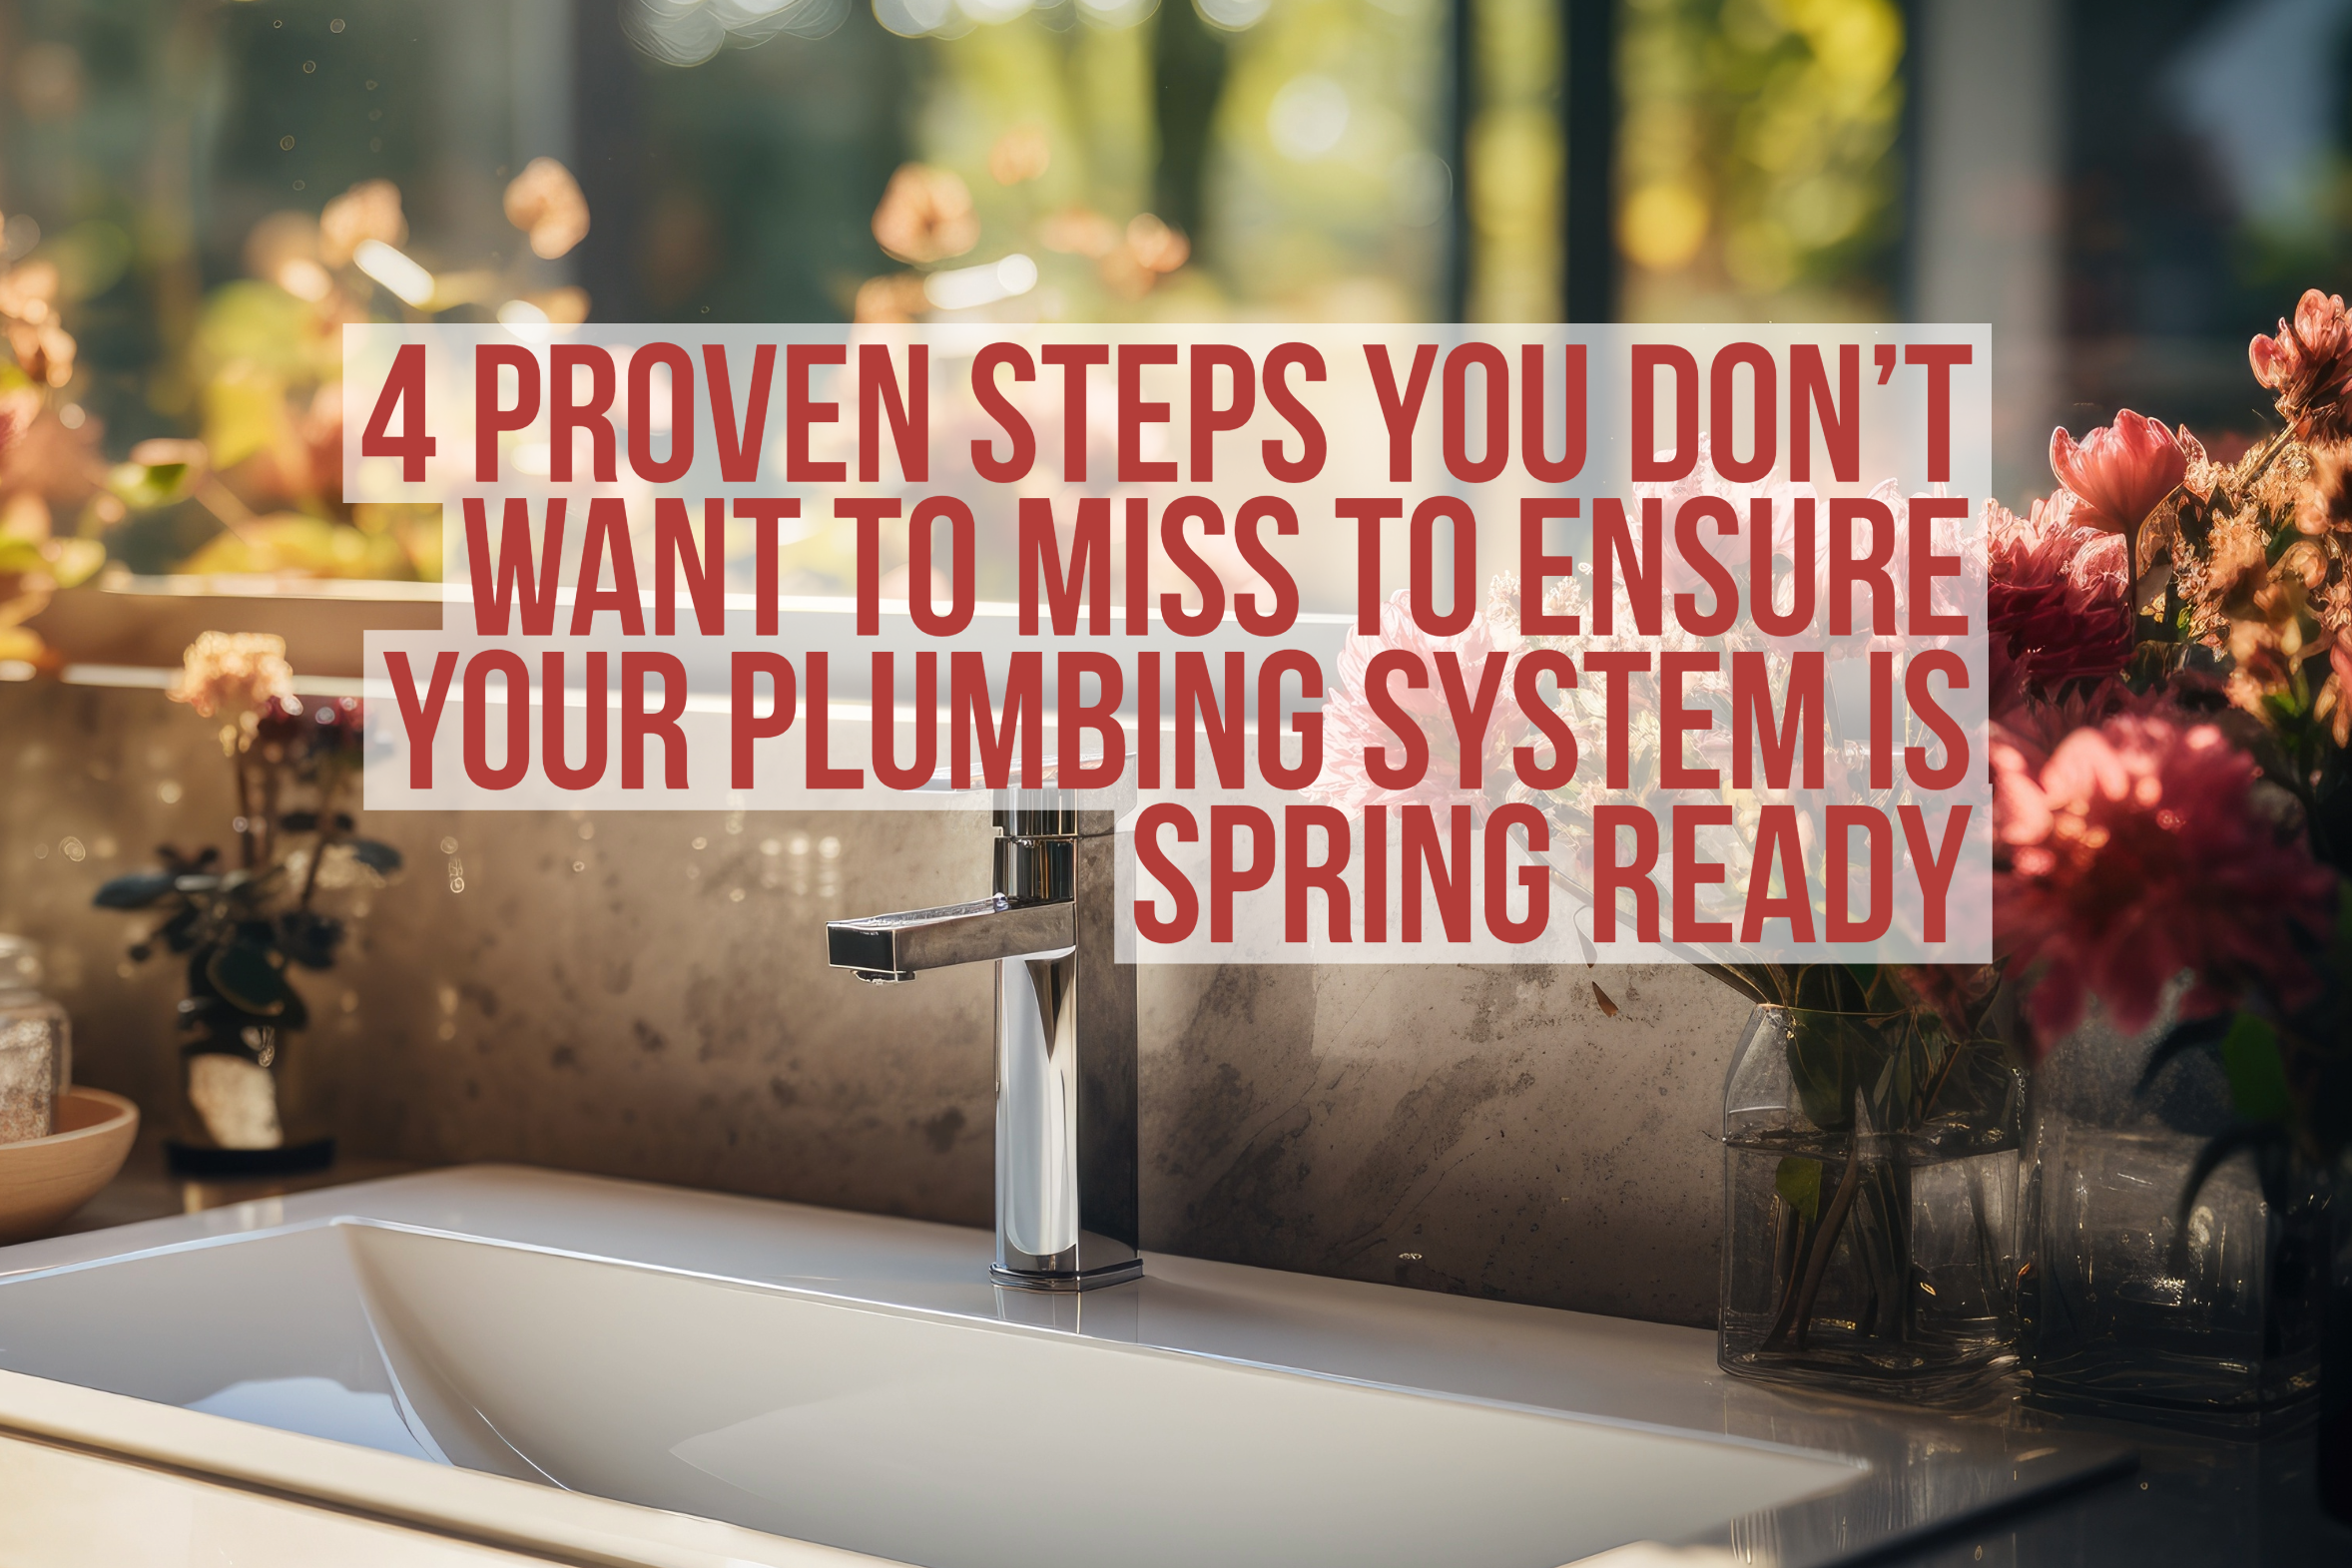 Steps to getting your plumbing system spring ready!